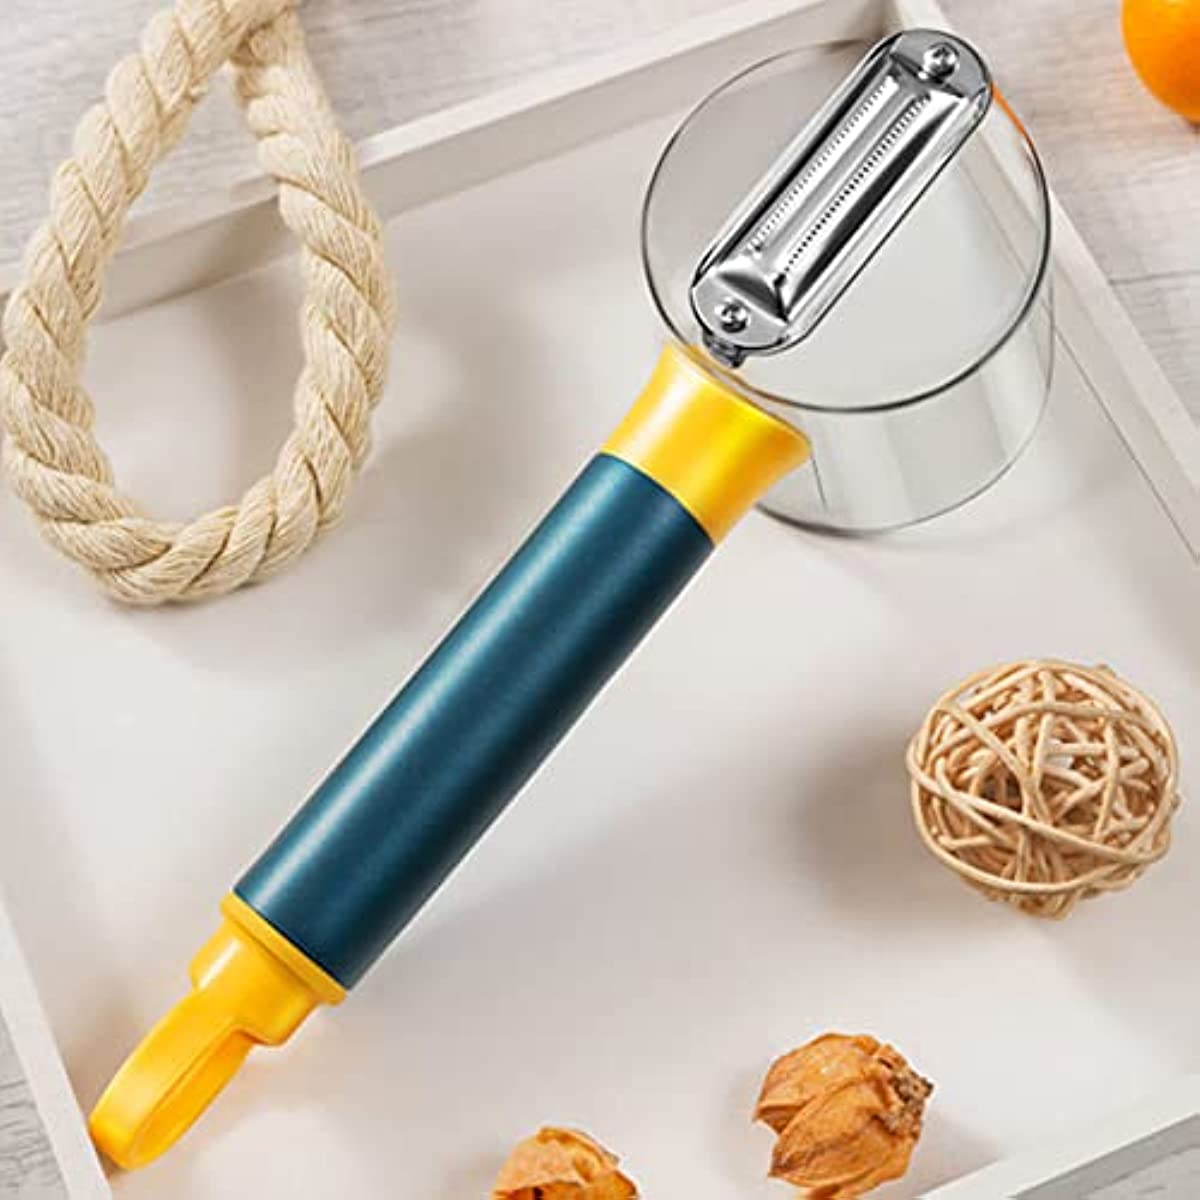 Stainless Steel Multi-functional Storage Peeler With Container For